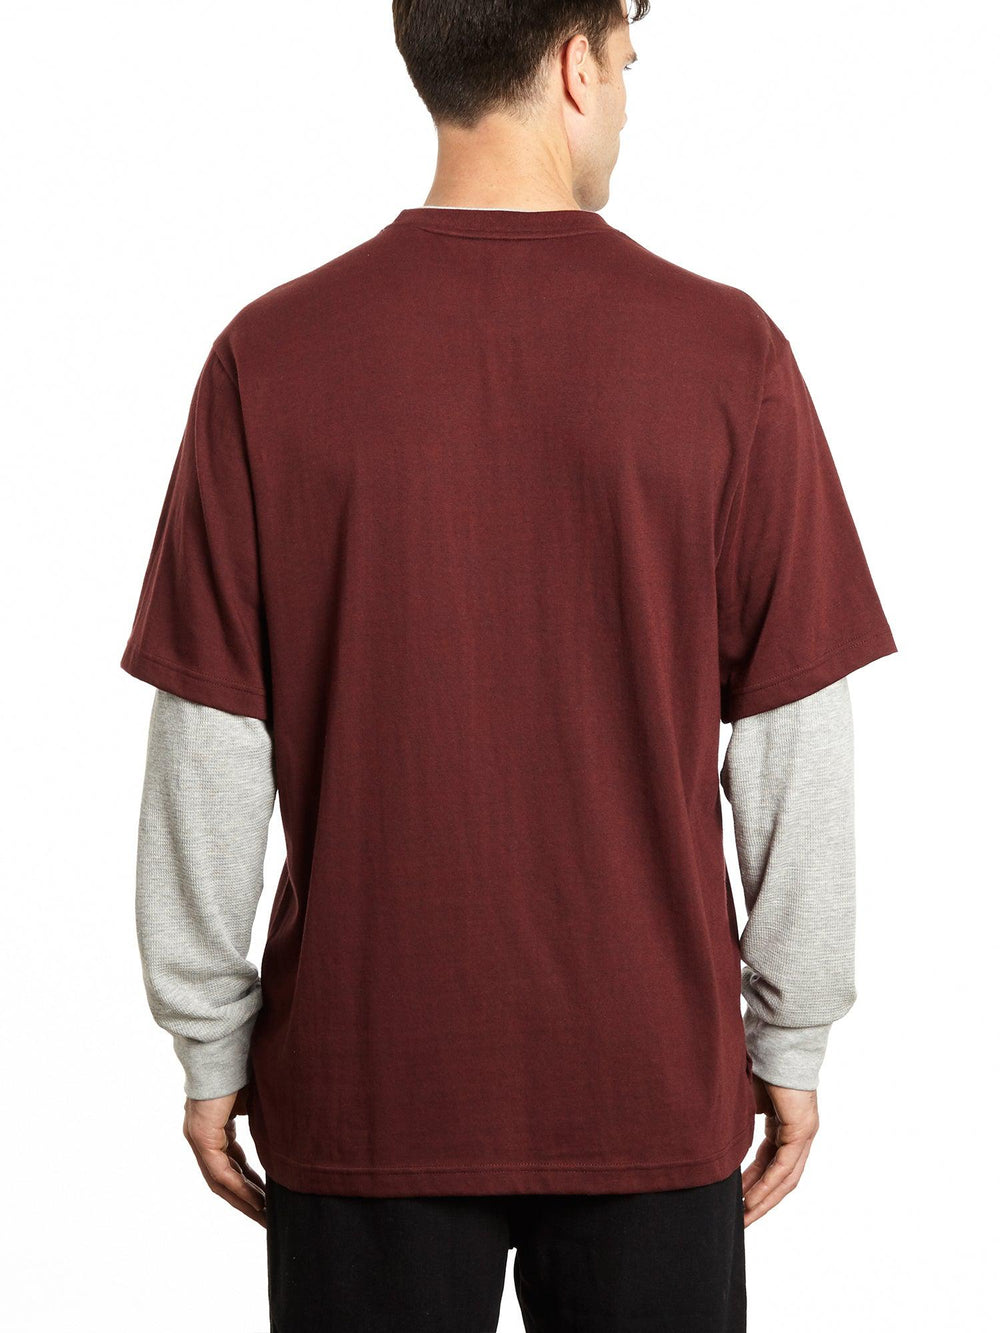 Long Sleeve Pocketed Crew Shirt with Thermal Sleeves